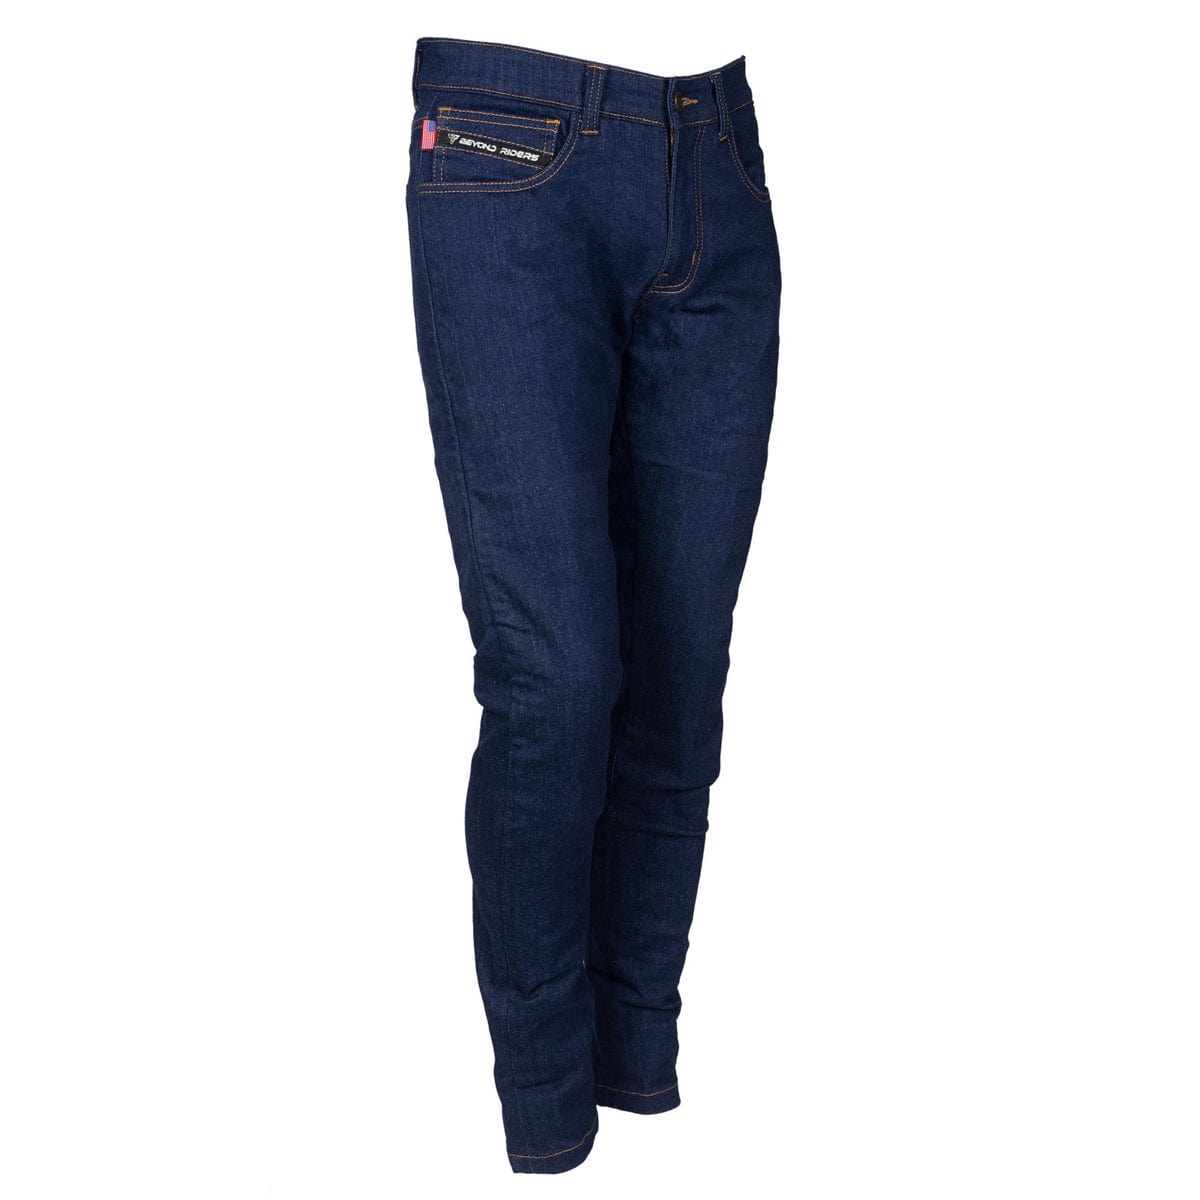 Straight Leg Protective Jeans - Blue with Pads